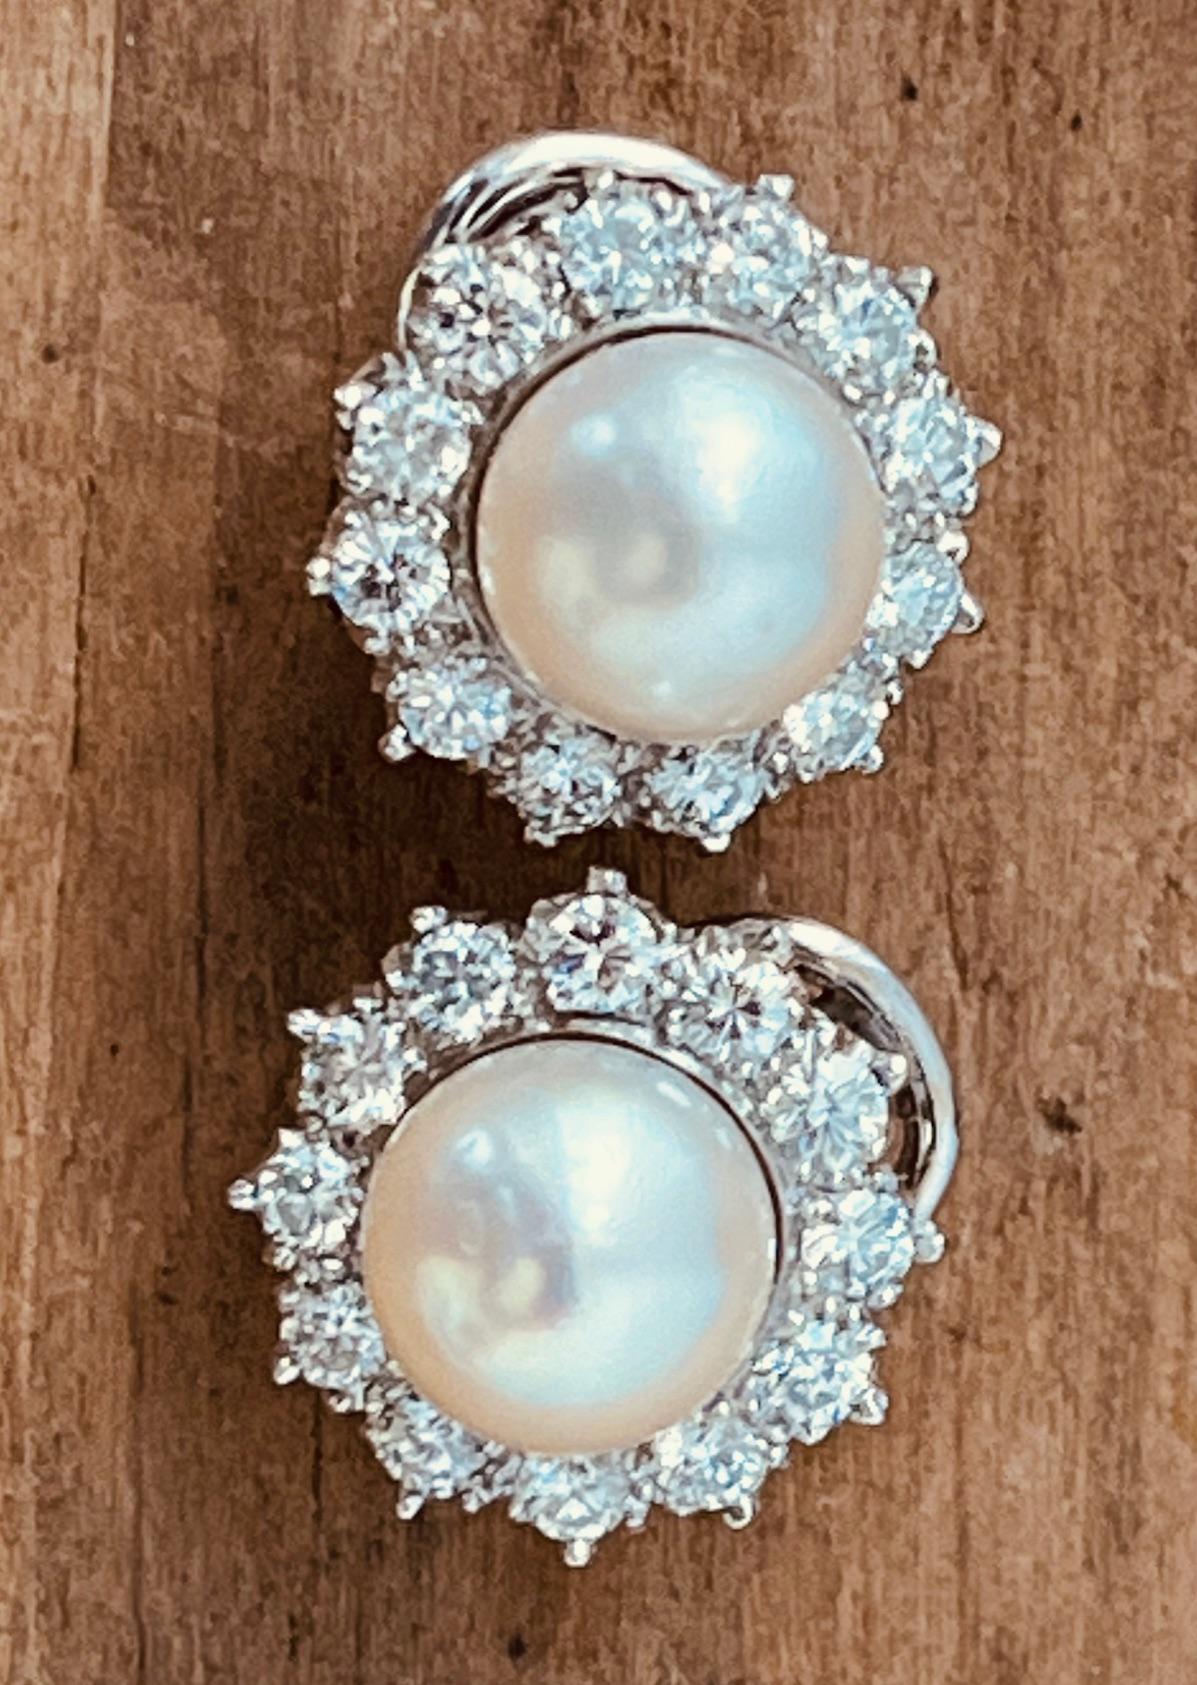 Brilliant Cut A Pair of Cultured Pearl and Diamond Earclips Mounted in Platinum. Circa 1970's  For Sale